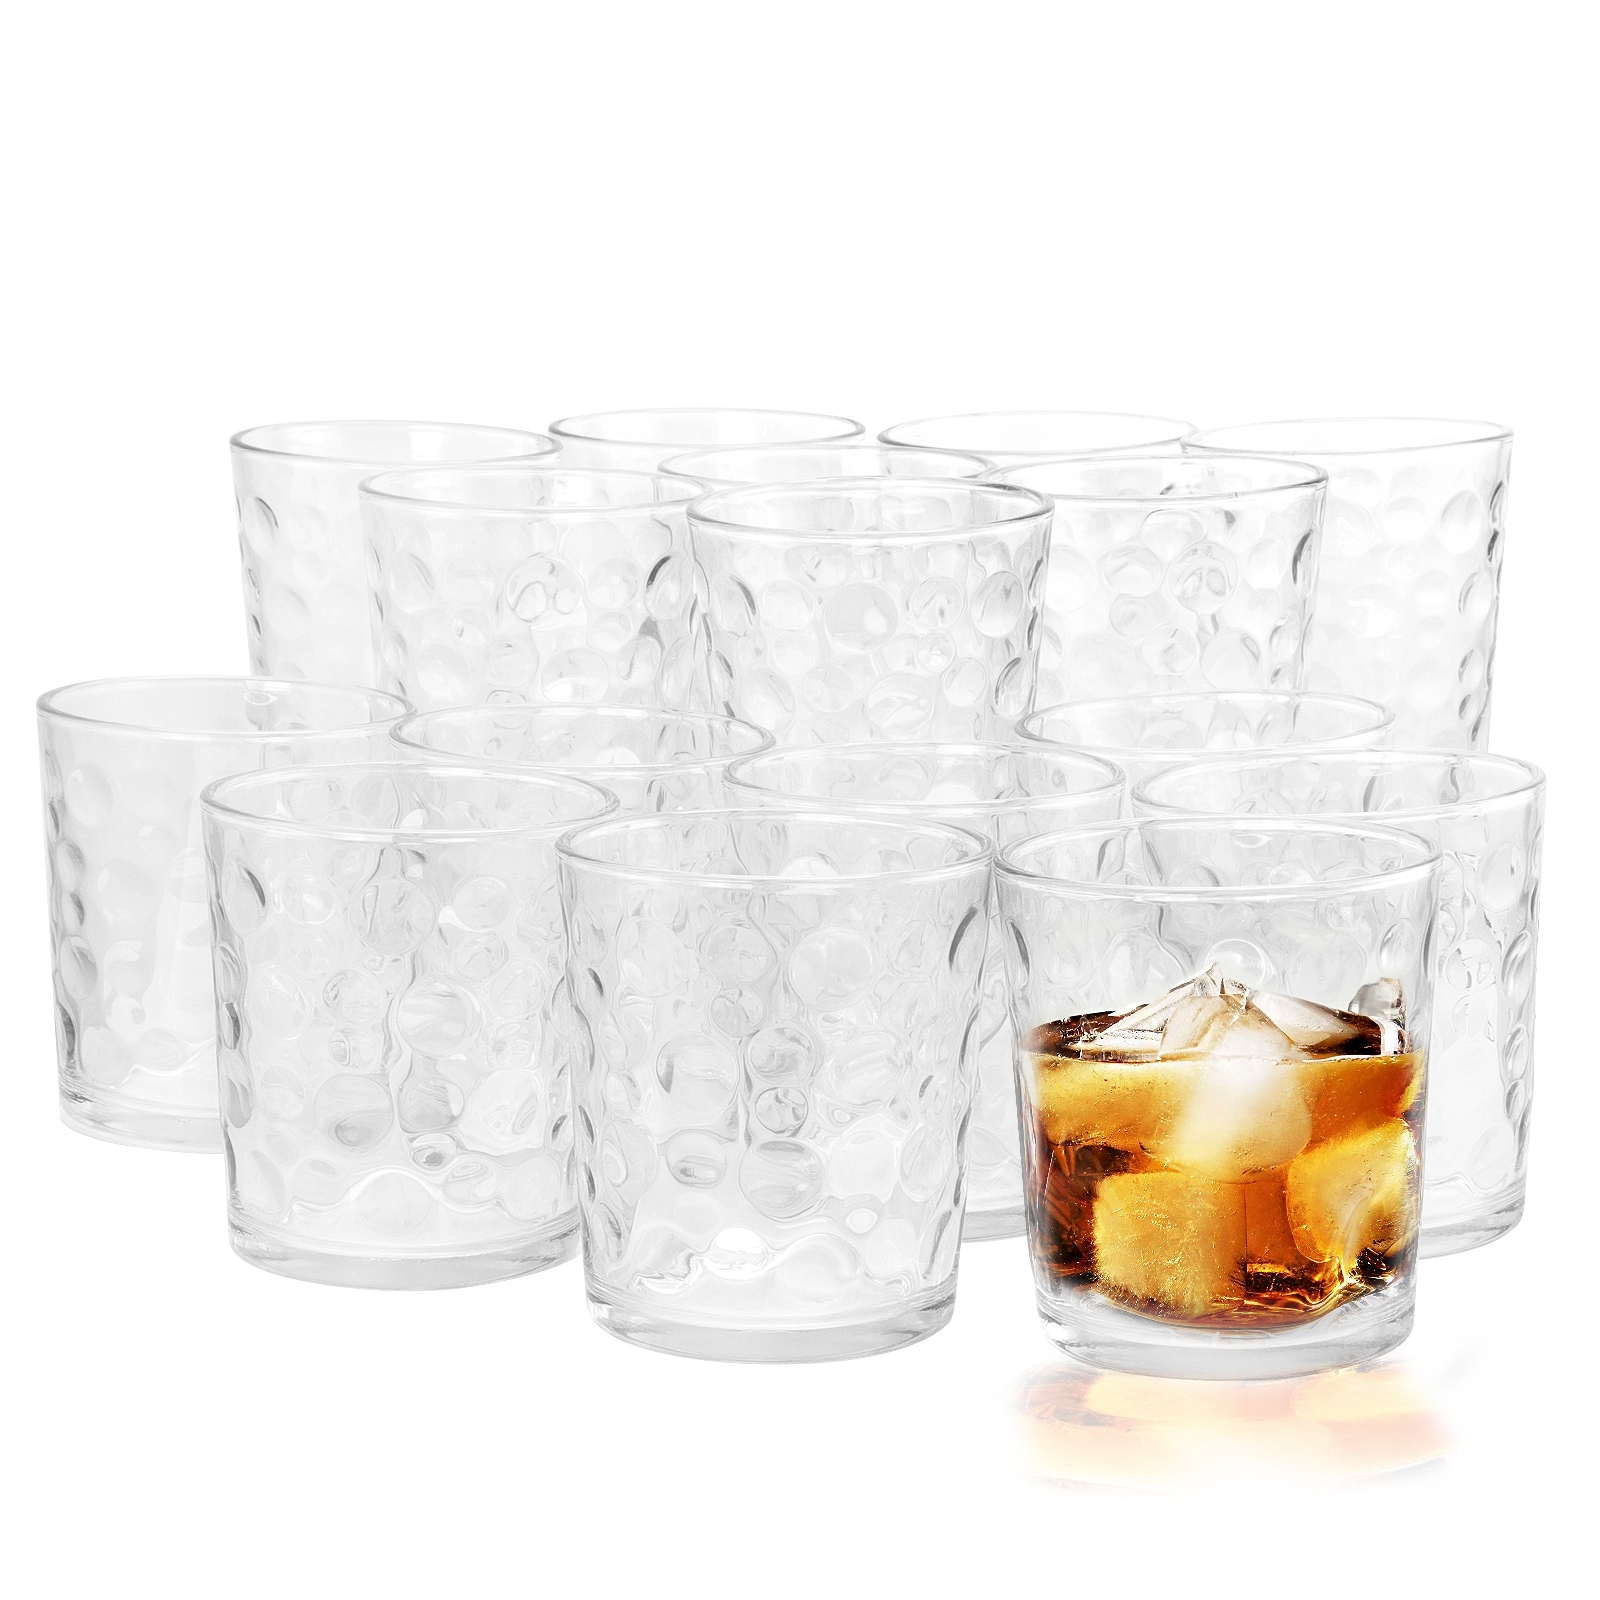 https://ak1.ostkcdn.com/images/products/is/images/direct/b7874931840870bbf1e99d82e3a0e96d0351241b/Gibson-Home-Great-Foundations-16-Piece-Tumbler-and-Double-Old-Fashioned-Glass-Set-in-Bubble-Pattern.jpg